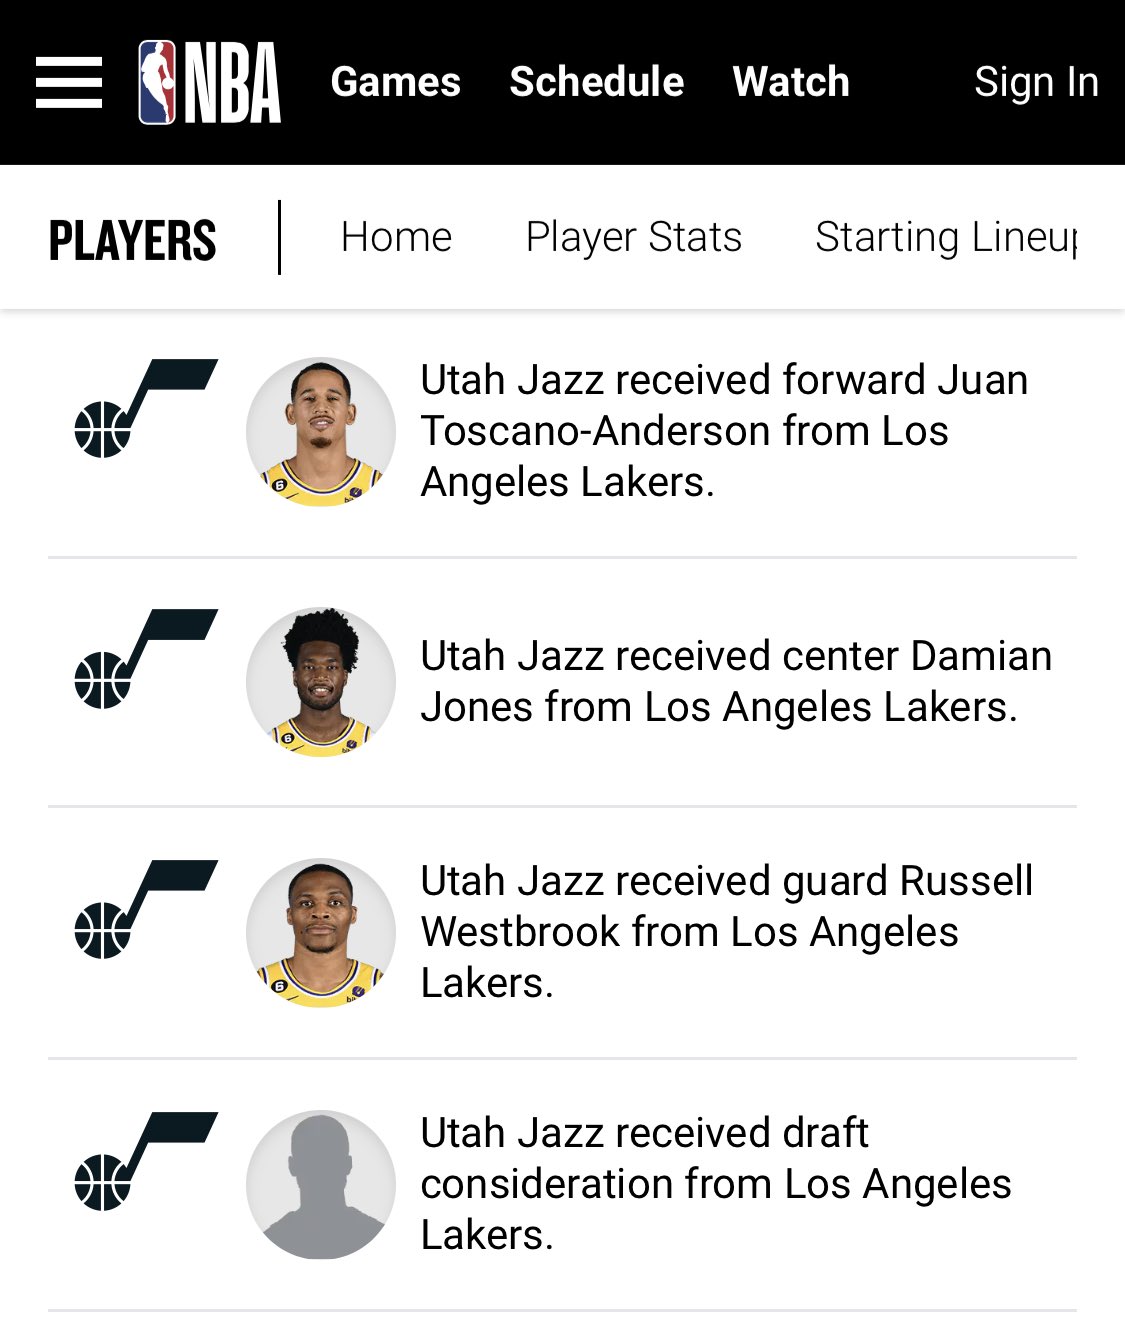 What Are Jazz Getting In Westbrook, Toscano-Anderson, Jones?